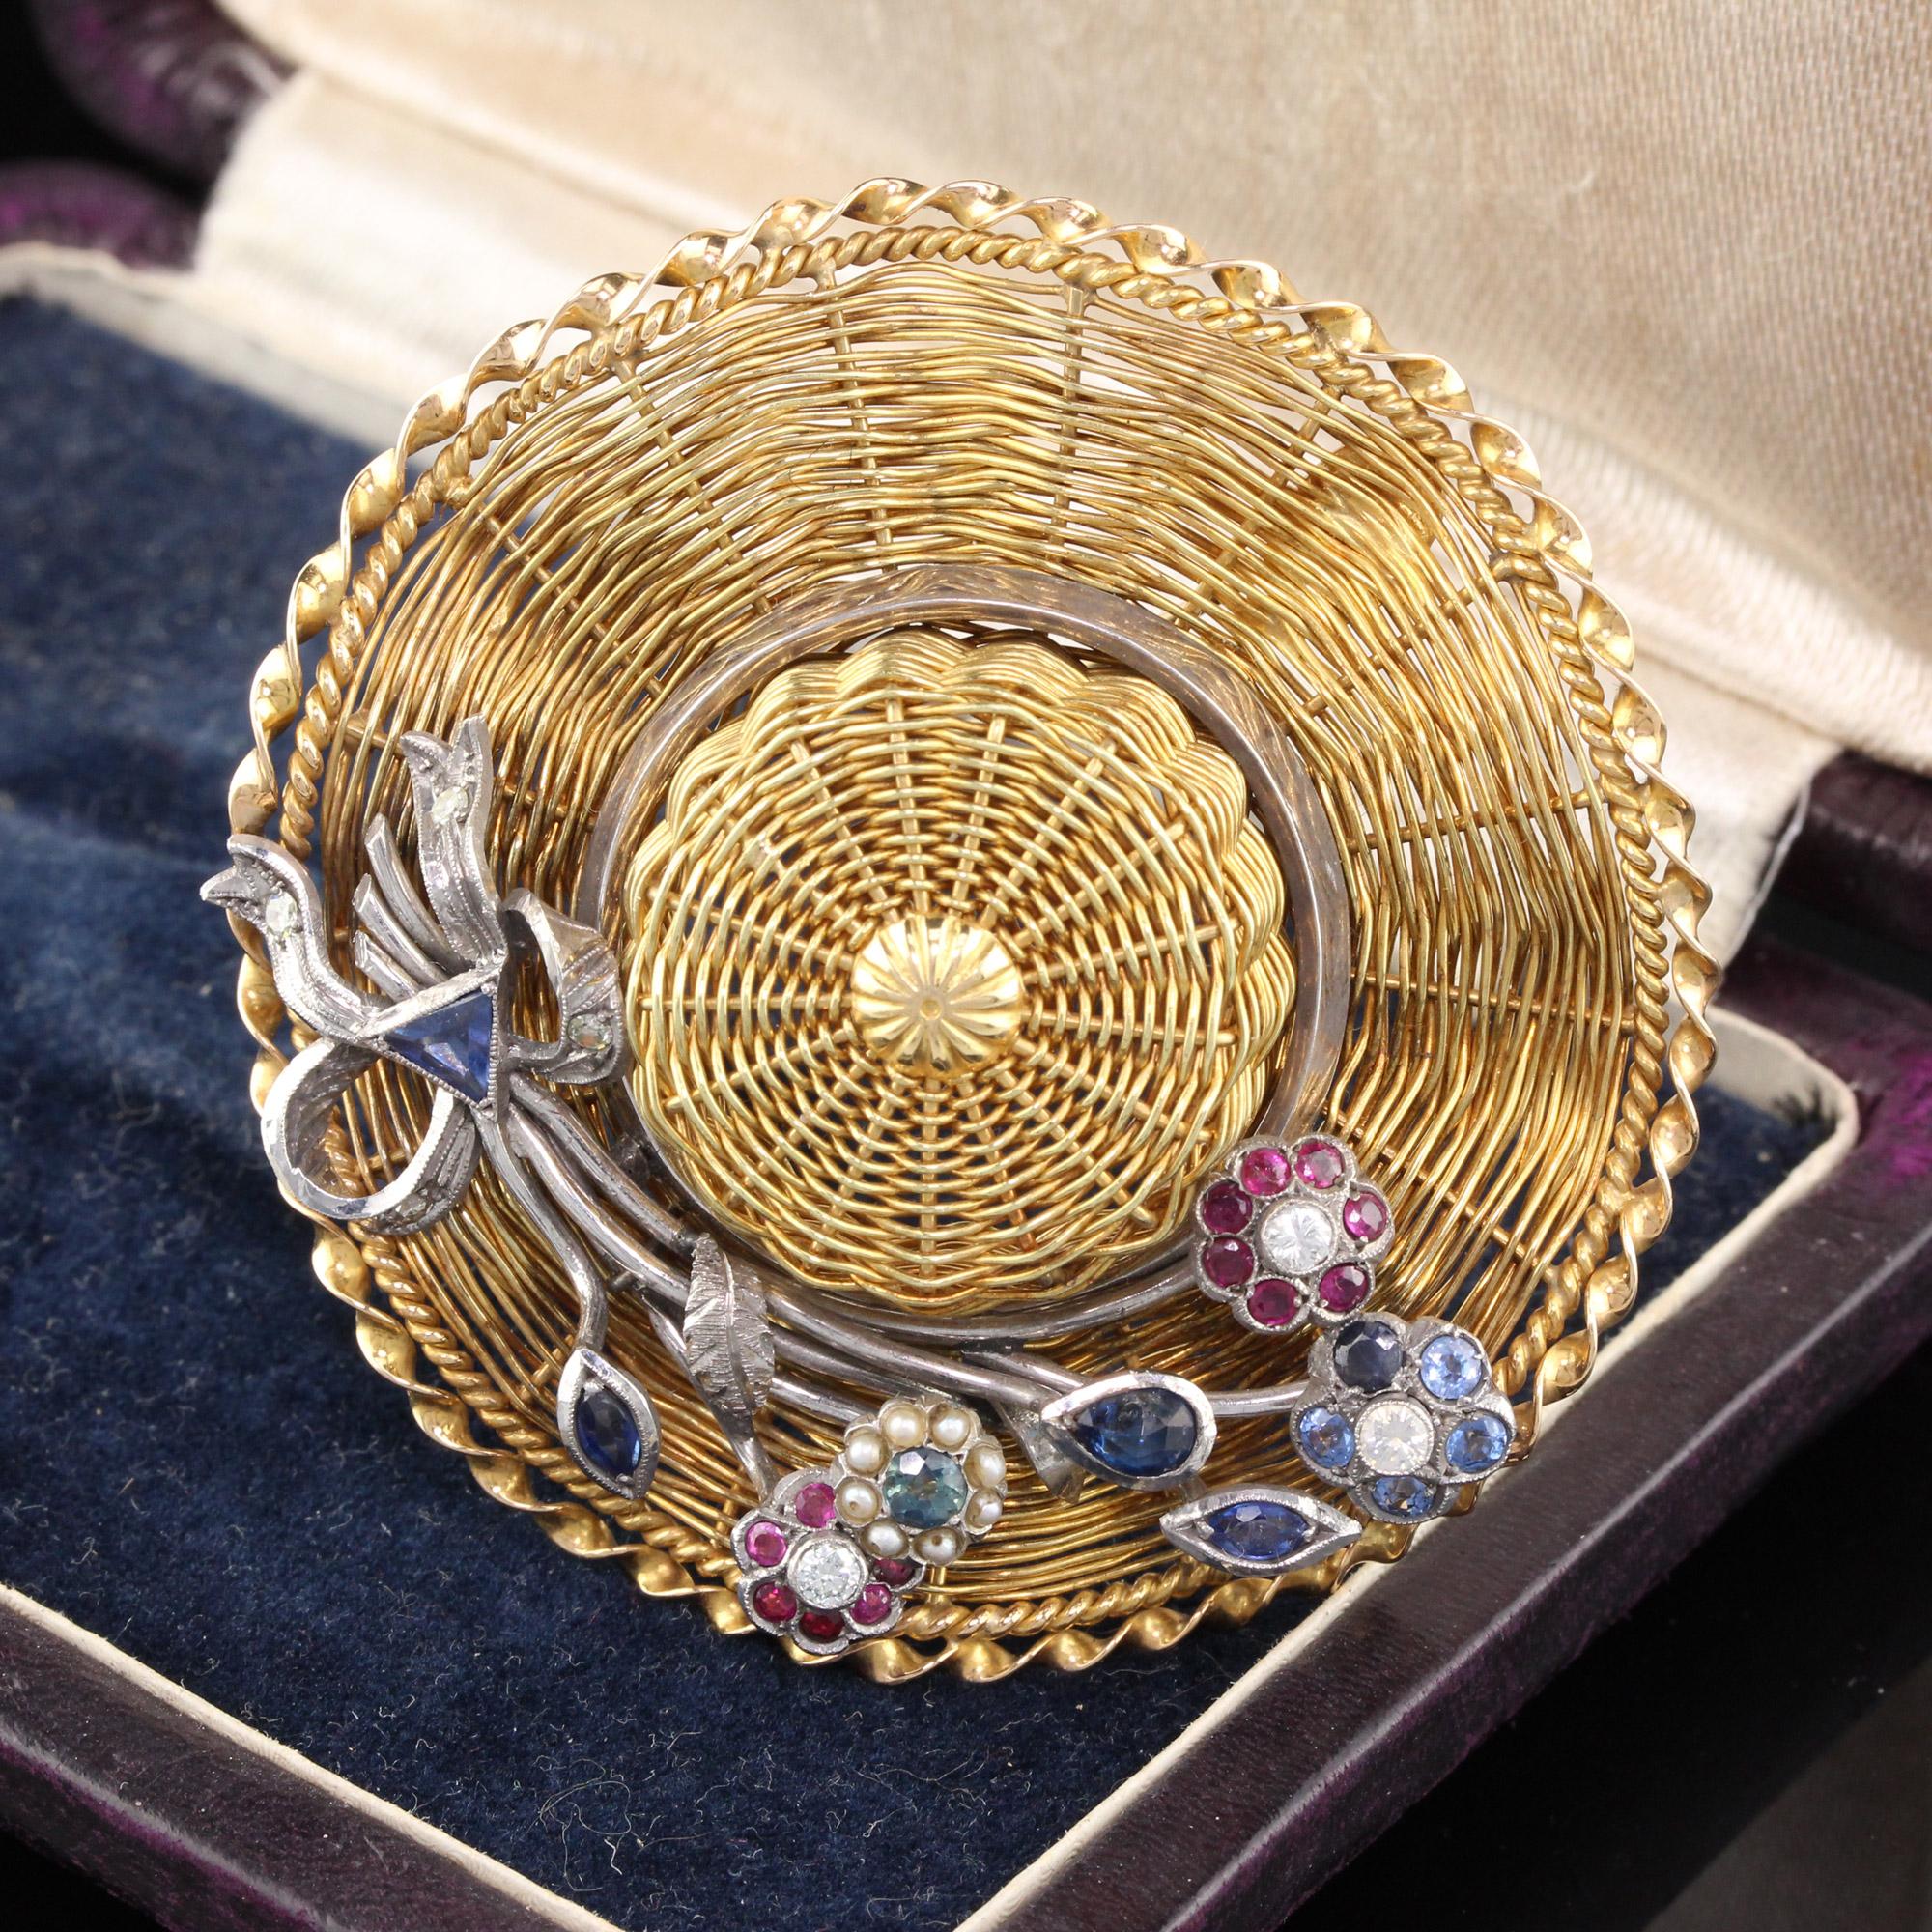 Unique and adorable, this garden party hat brooch is made of woven 18K yellow gold wire. The floral details on top of the hat are made of rubies, sapphires, diamonds and seed pearls set in silver. One of a kind!

Metal: 18K Yellow Gold & Silver